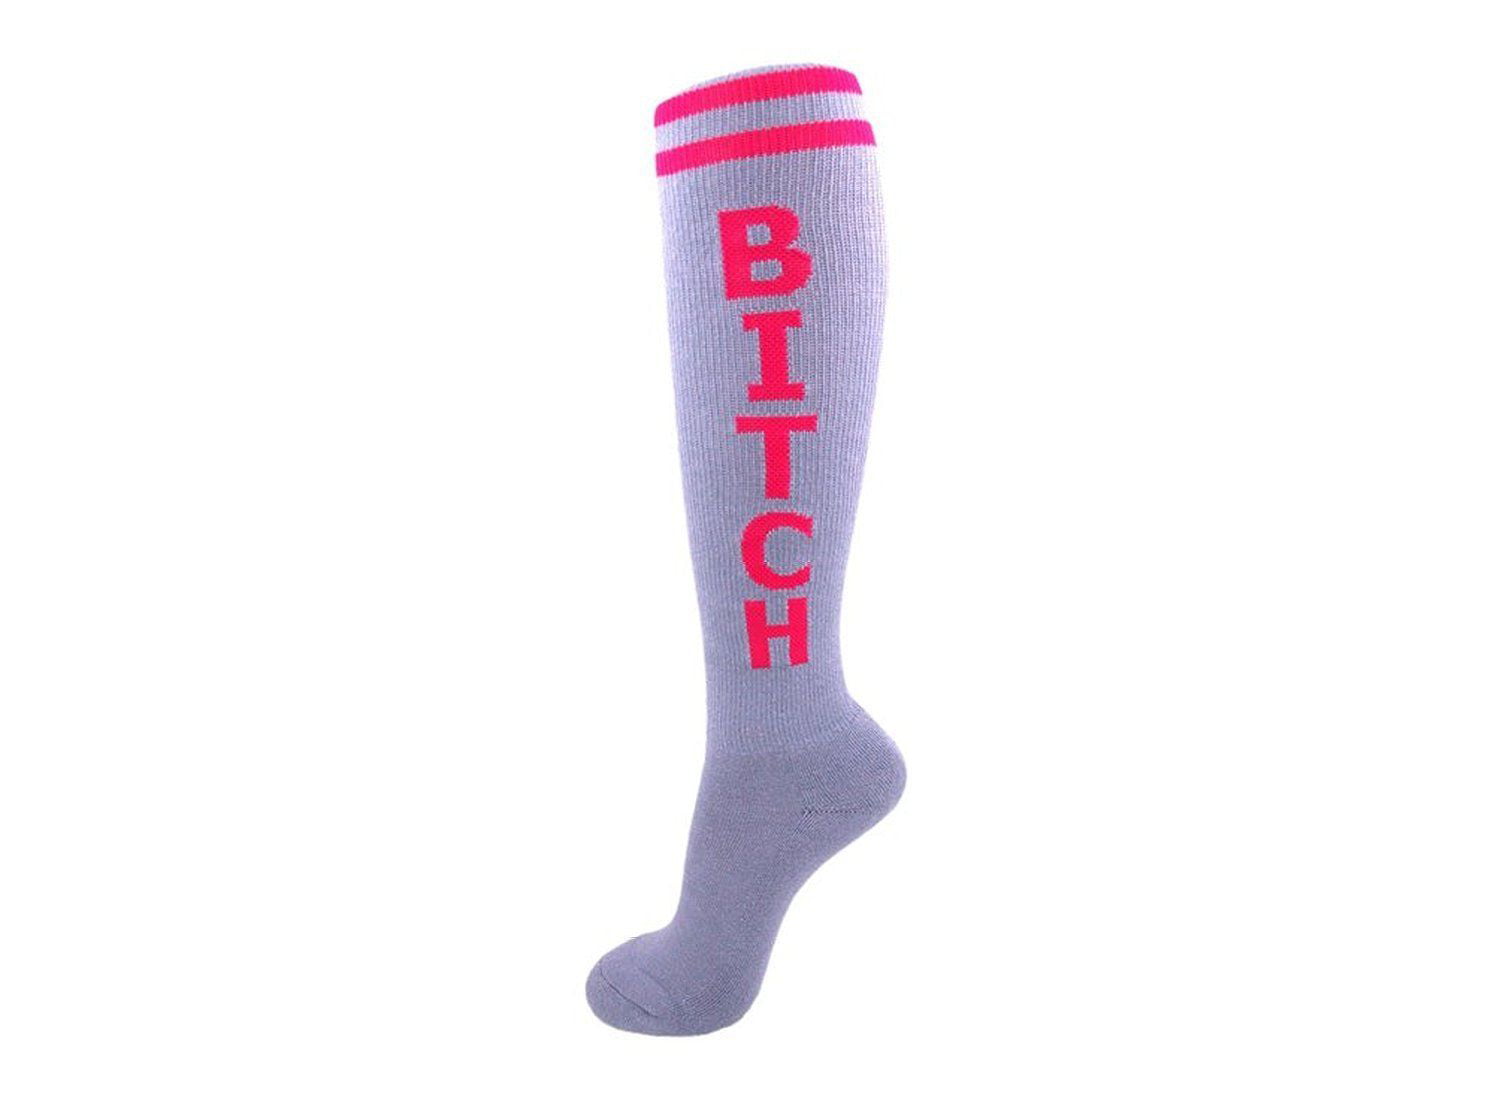 Btch Unisex Athletic Knee Socks Gray And Hot Pink By Gumball Poodle